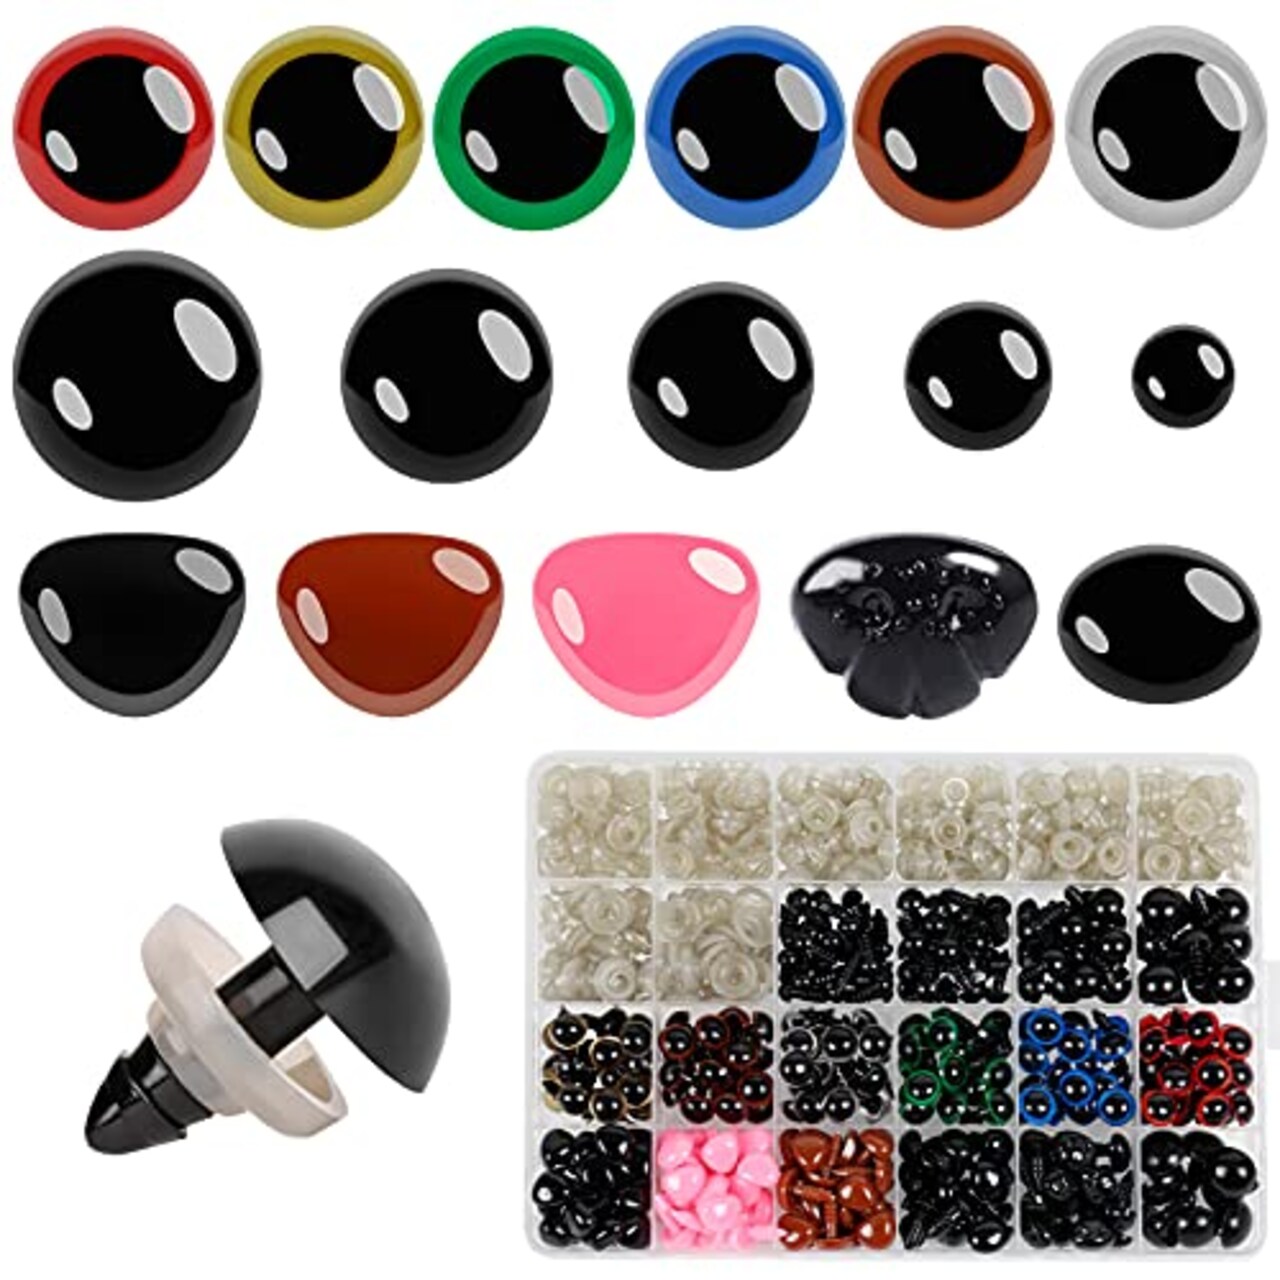 600pcs Plastic Colored Safety Eyes and Noses for Amigurumi, 6mm~14mm